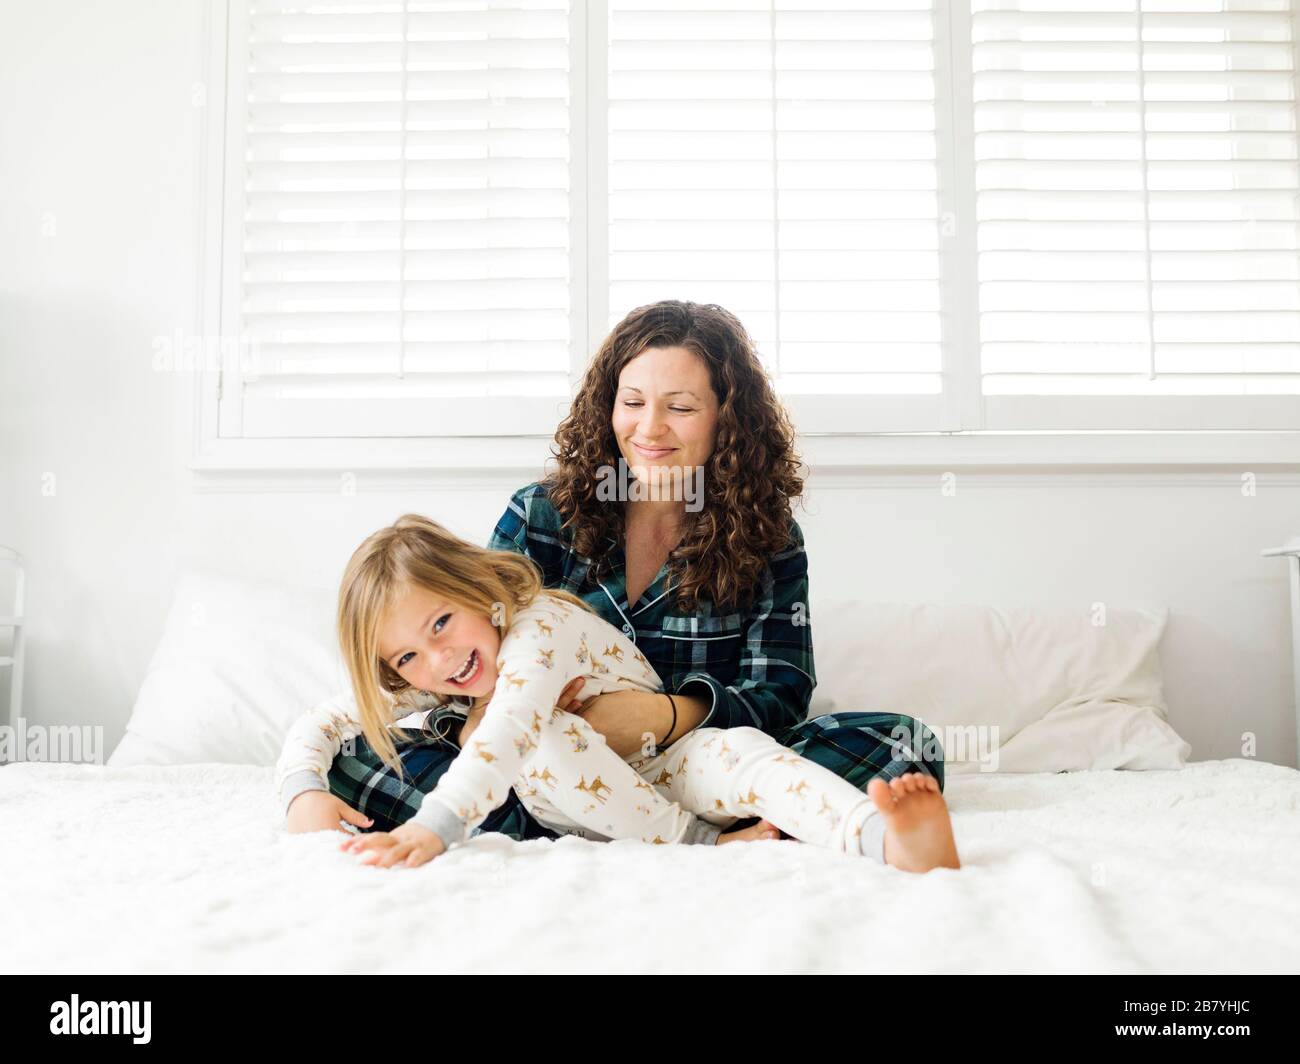 Mother and daughter hugging on bed Stock Photo